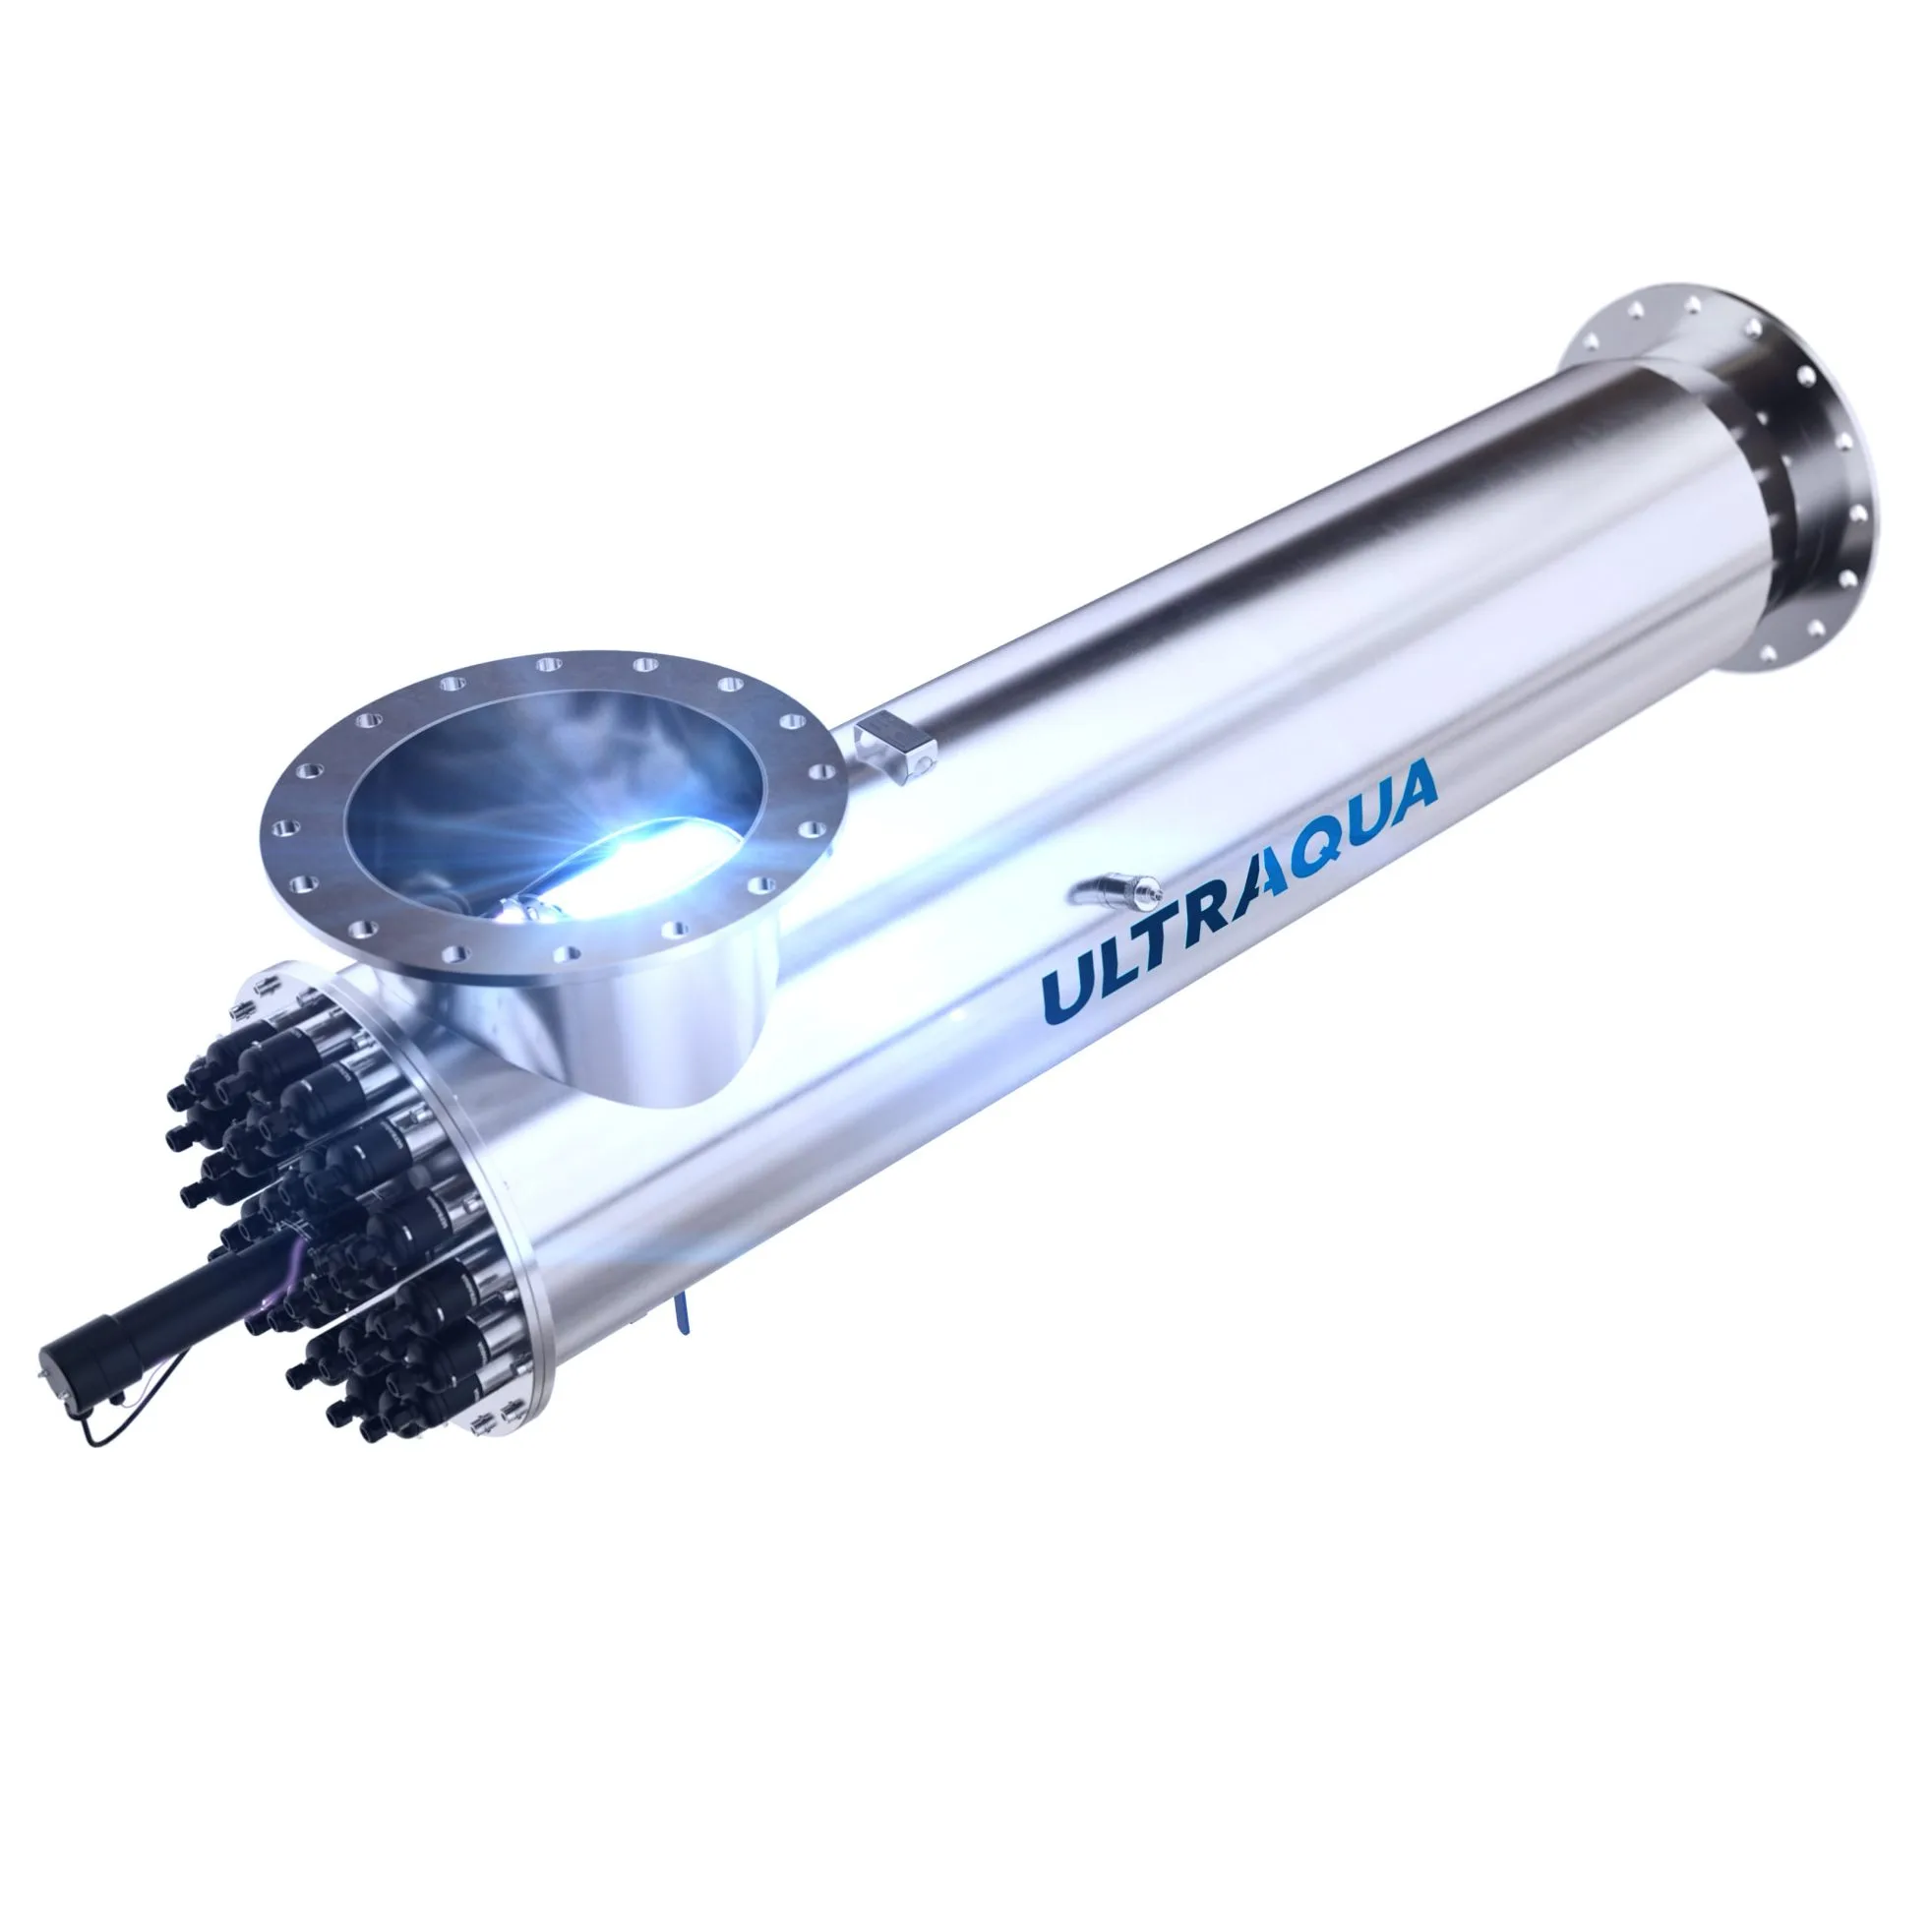 low uvt series uv disinfection system